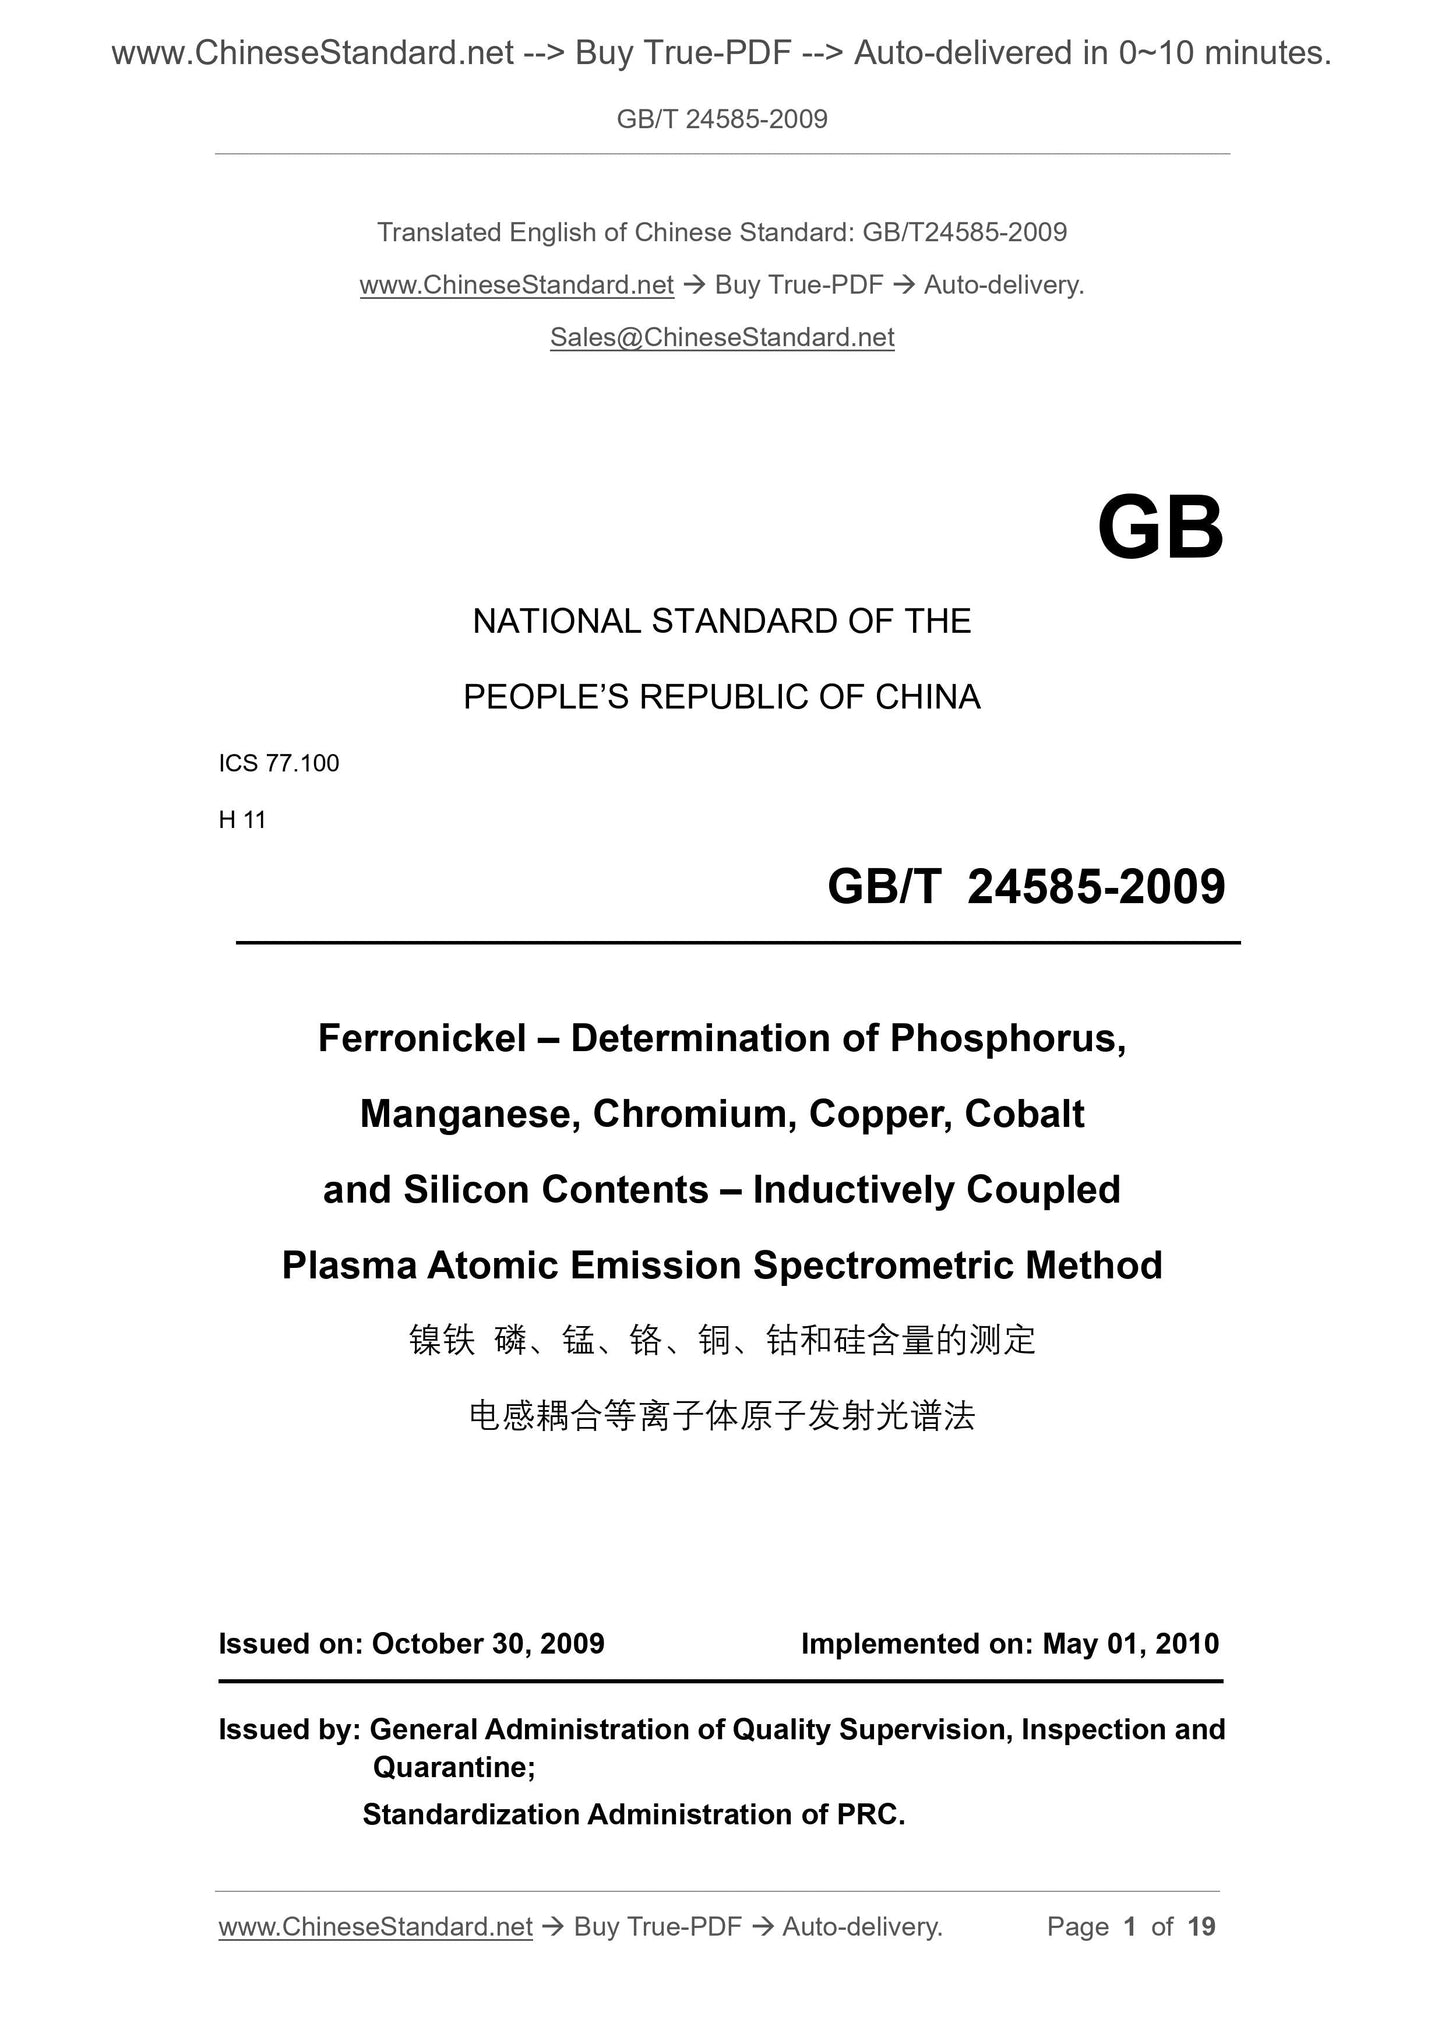 GB/T 24585-2009 Page 1